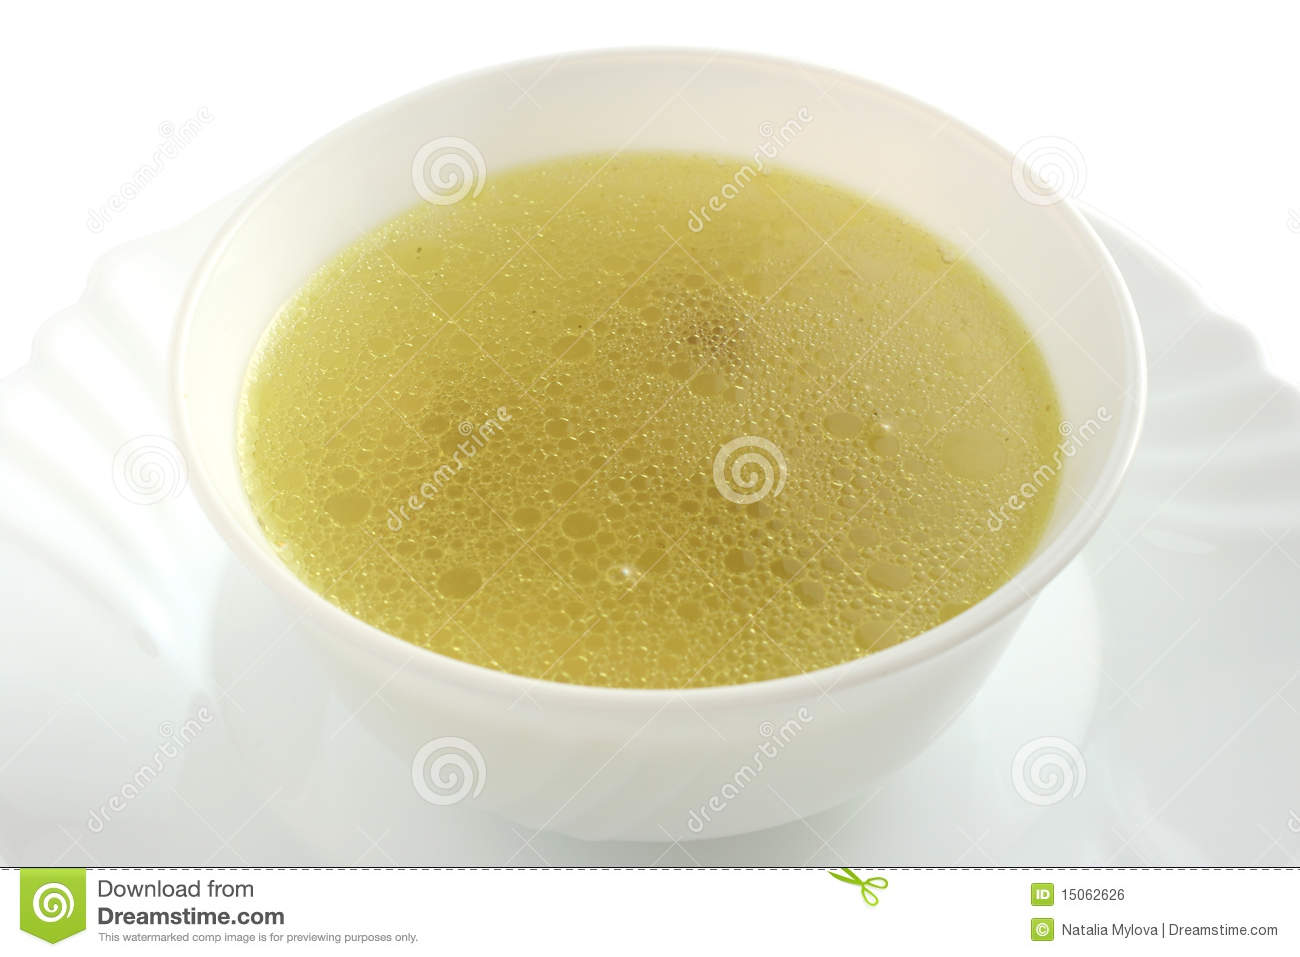 Chicken Broth In White Bowl On White Plate